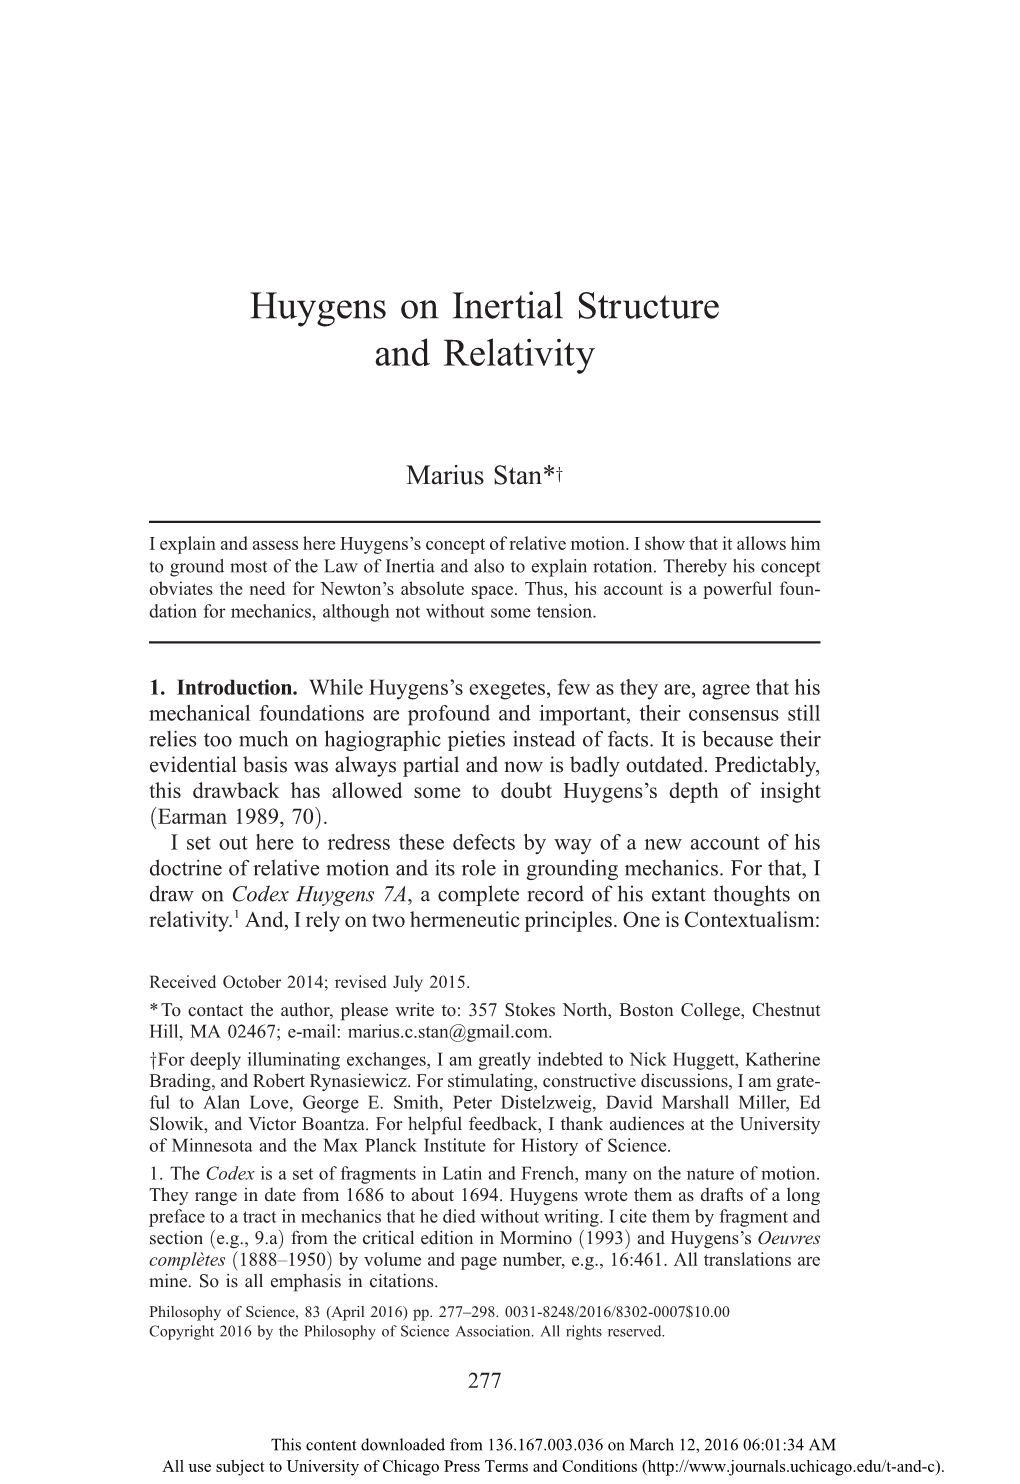 Huygens on Inertial Structure and Relativity